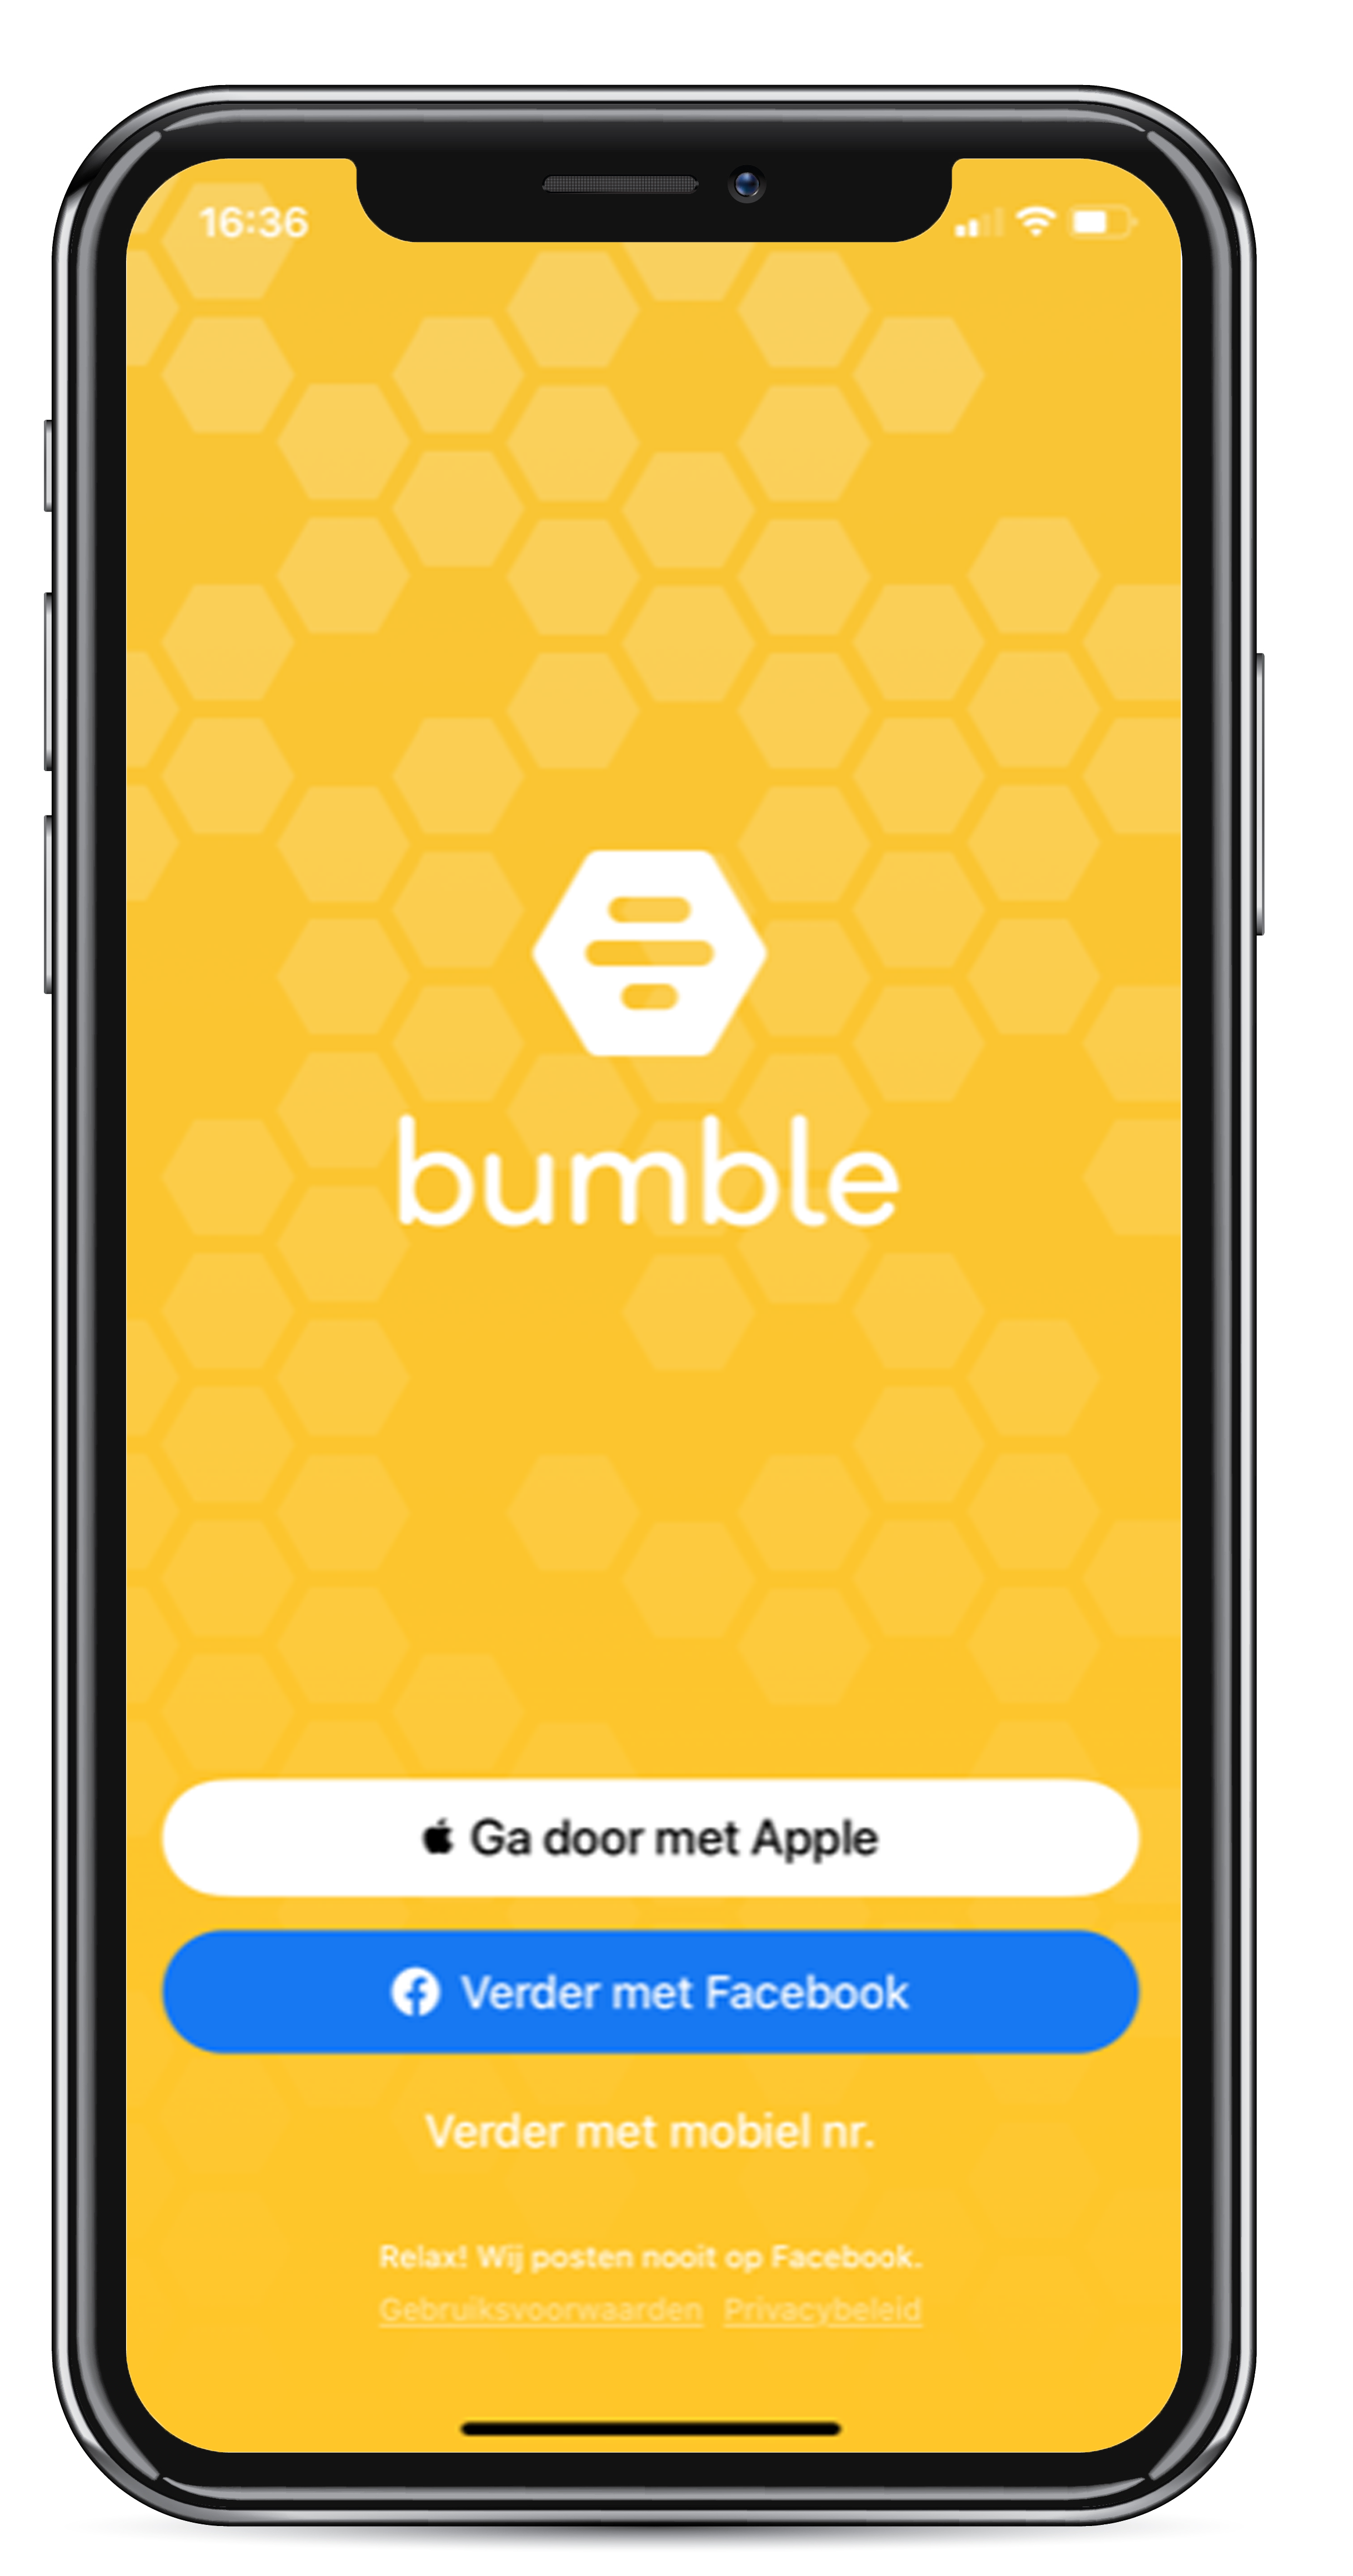 Facebook bumble login with How To